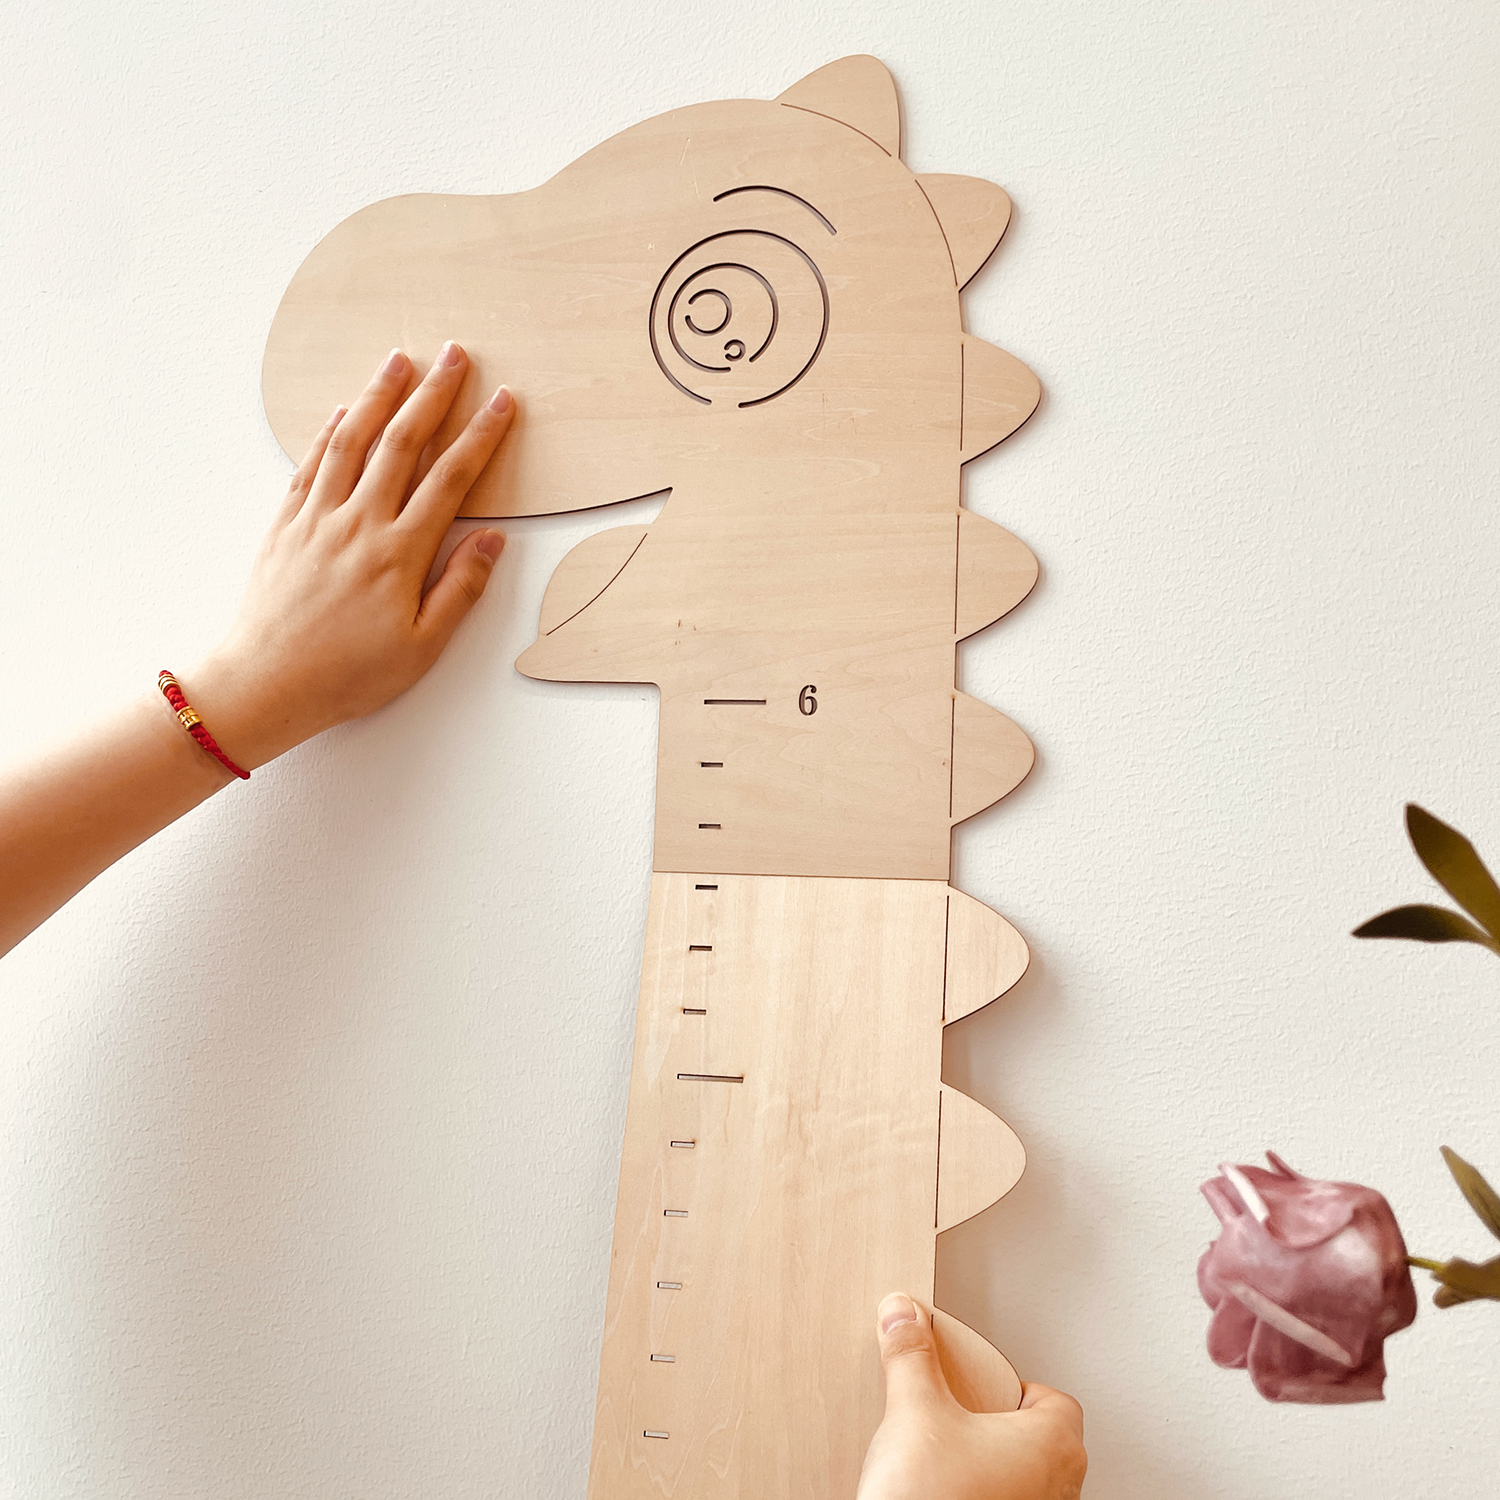 Personalized Wooden Baby Growth Chart - Detail 1